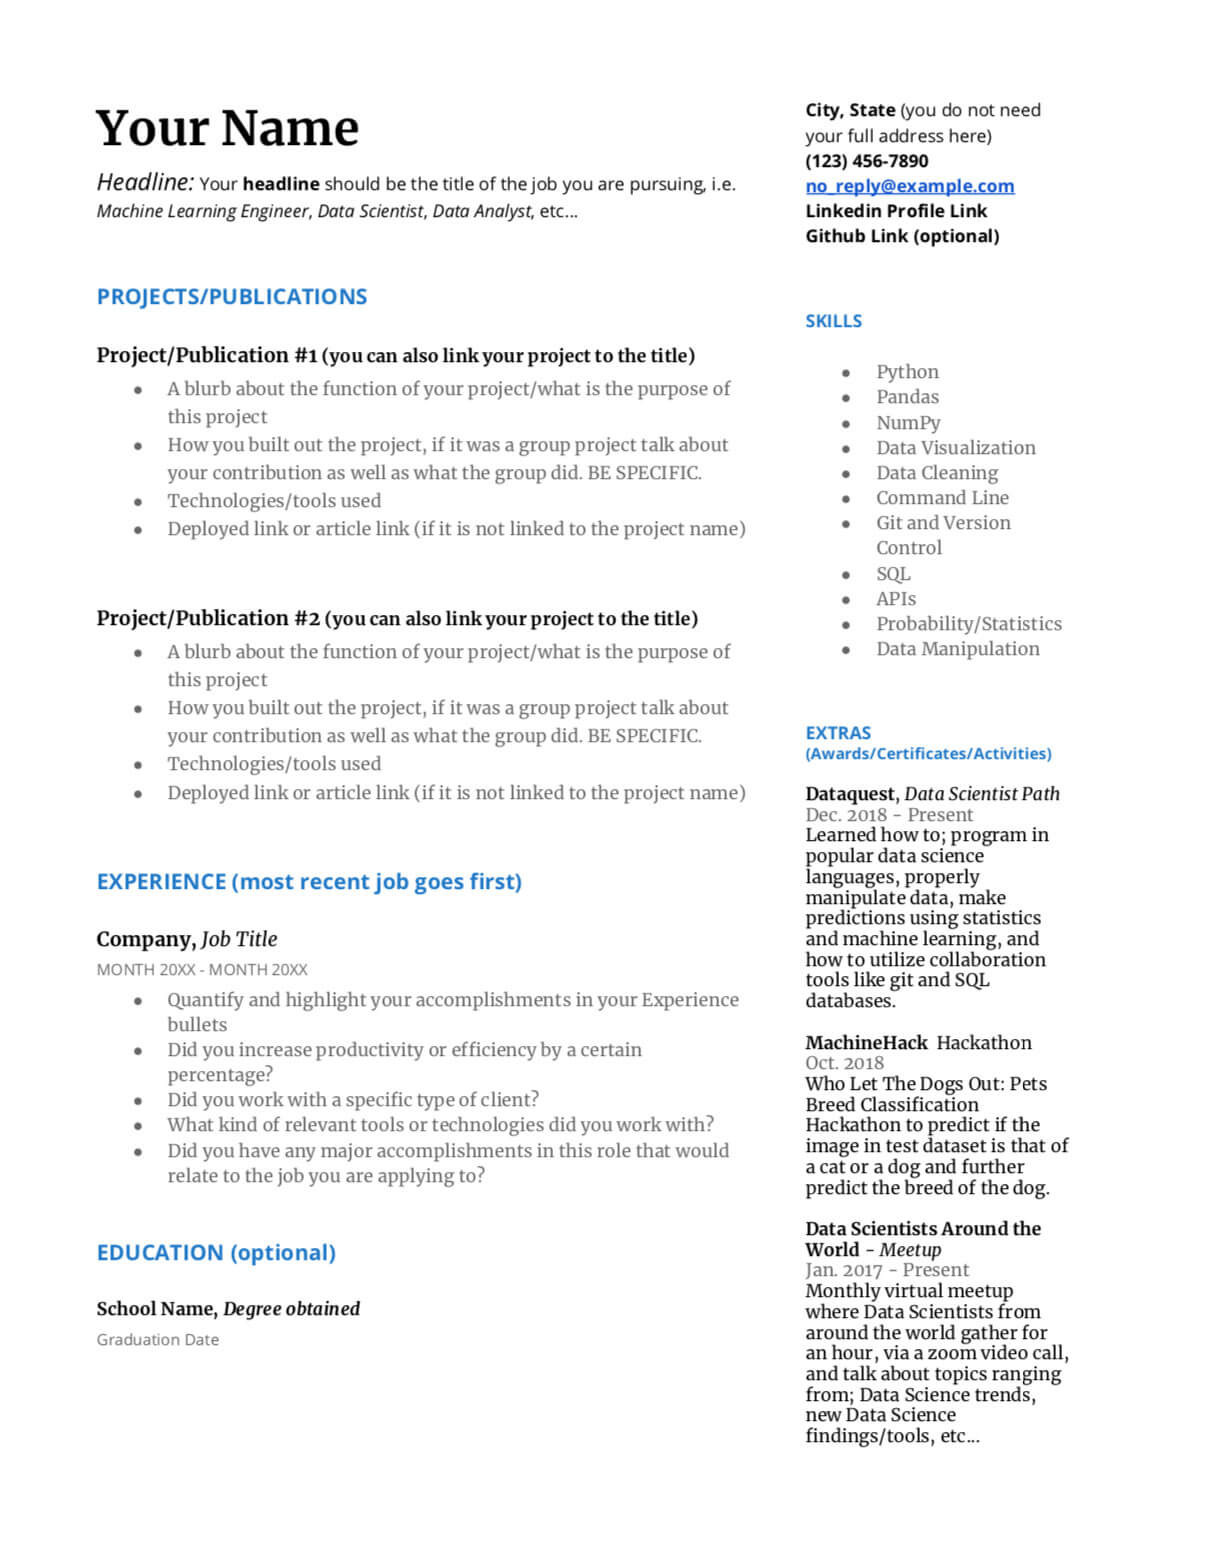 Machine Learning Sample Resume for Freshers How to Write A Great Data Science Resume â Dataquest